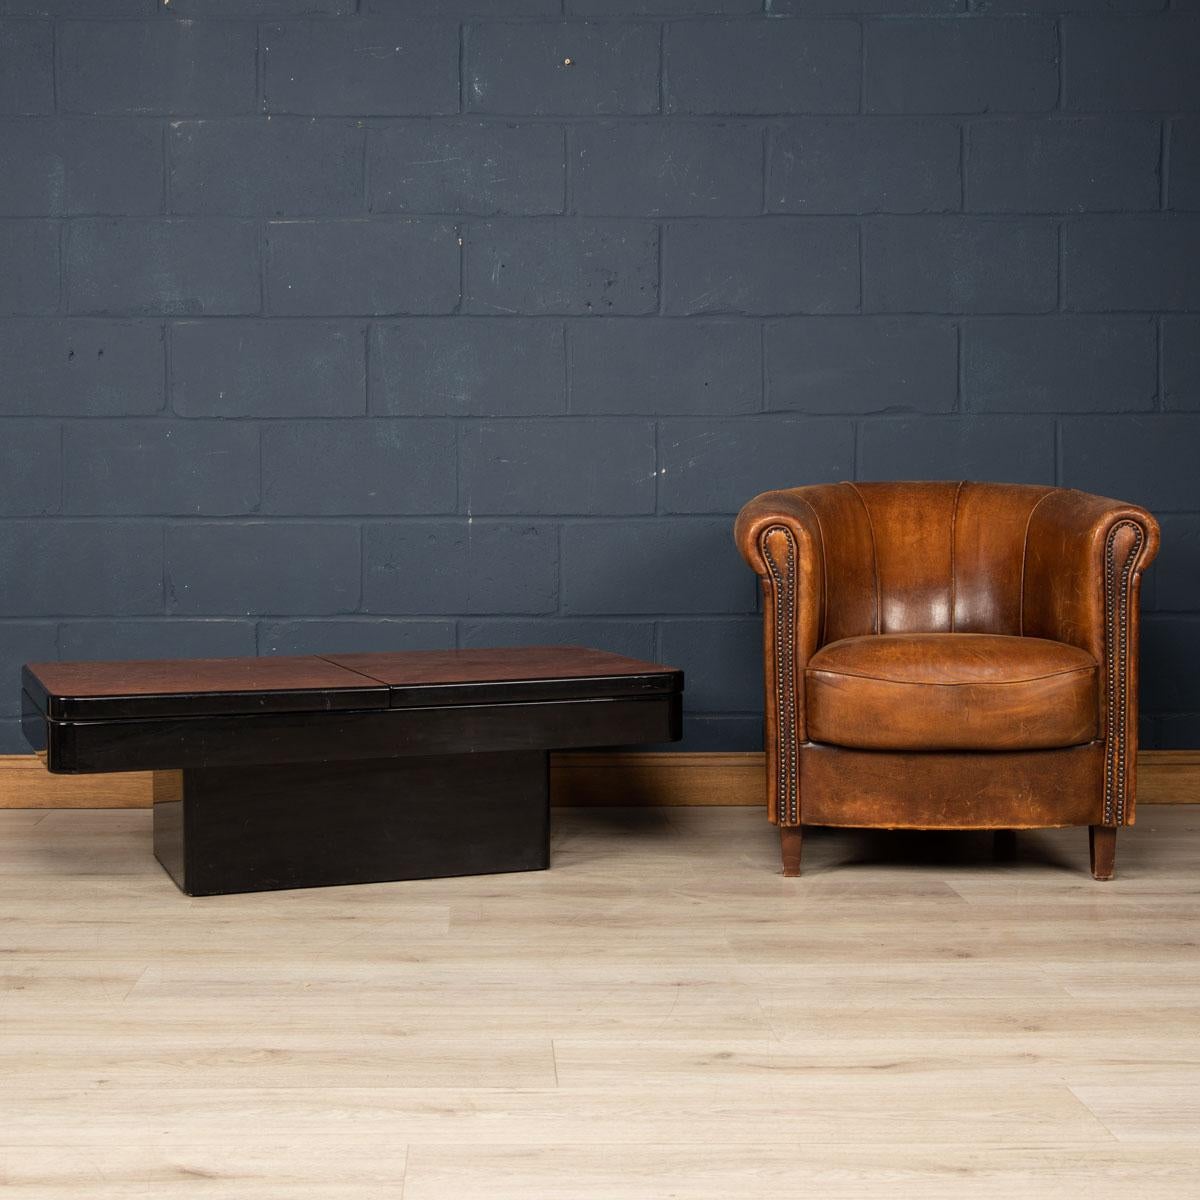 A stunning retro coffee table in the style of Aldo Tura, made in Italy around the 1970s. An exotic wood veneer finishes the table top and pops out wonderfully against the high gloss black ebonised base. The table opens up from a rectangle with ease